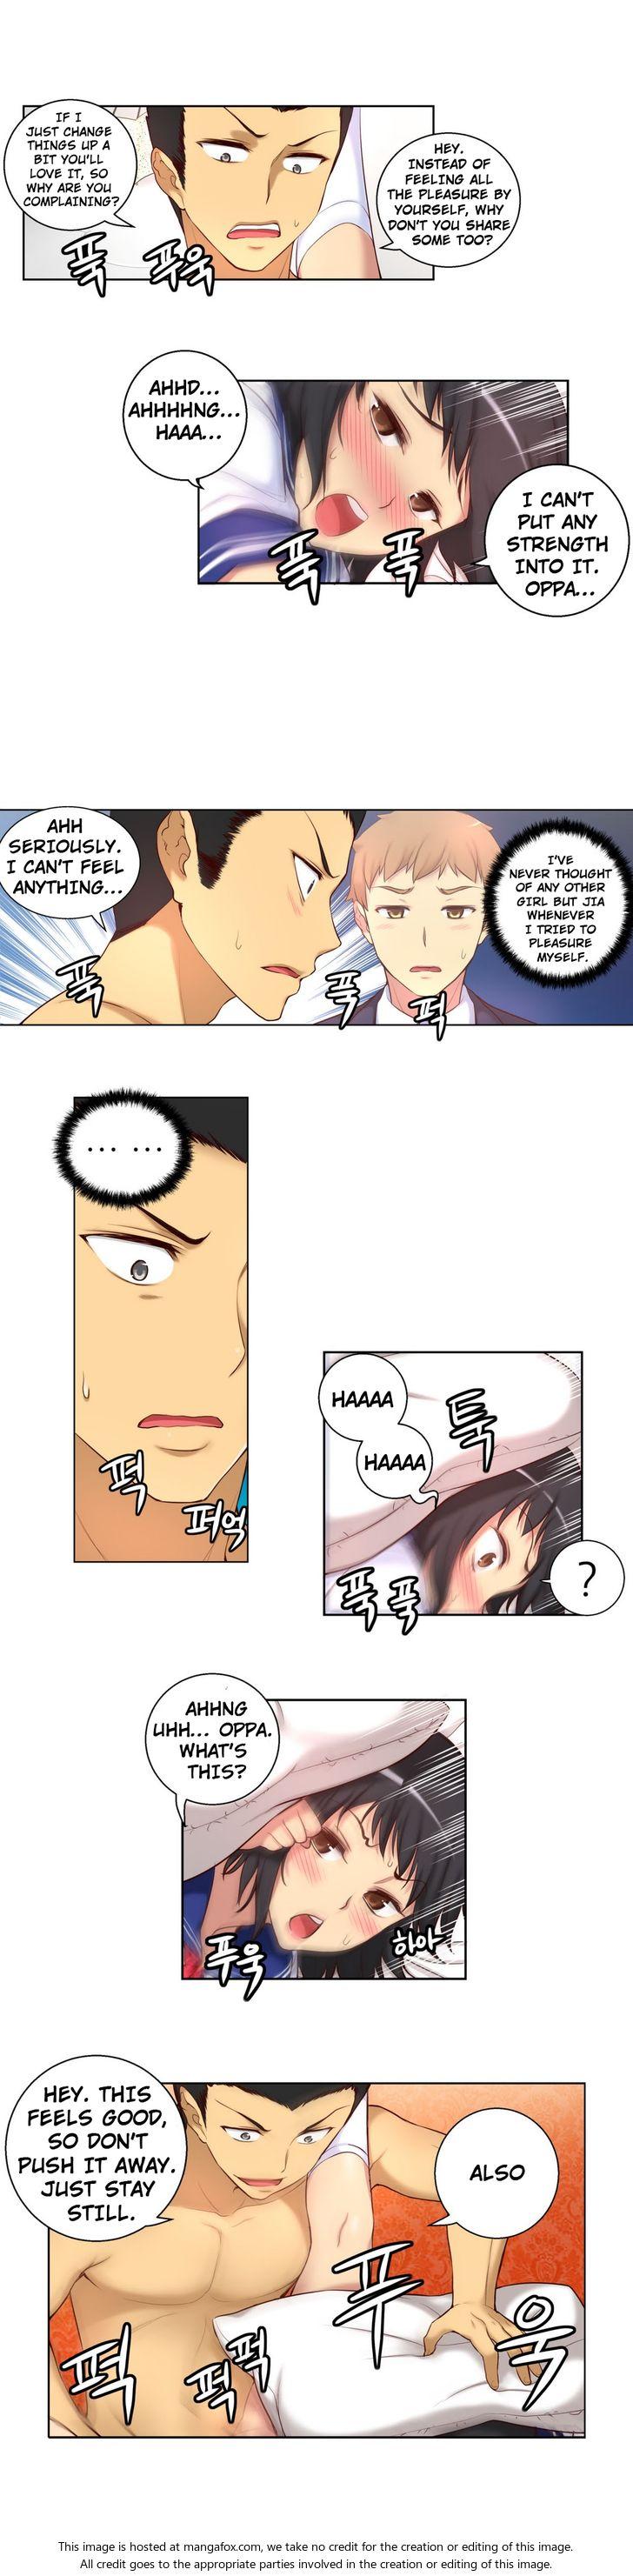 [Donggul Gom] She is Young (English) Part 1/2 768